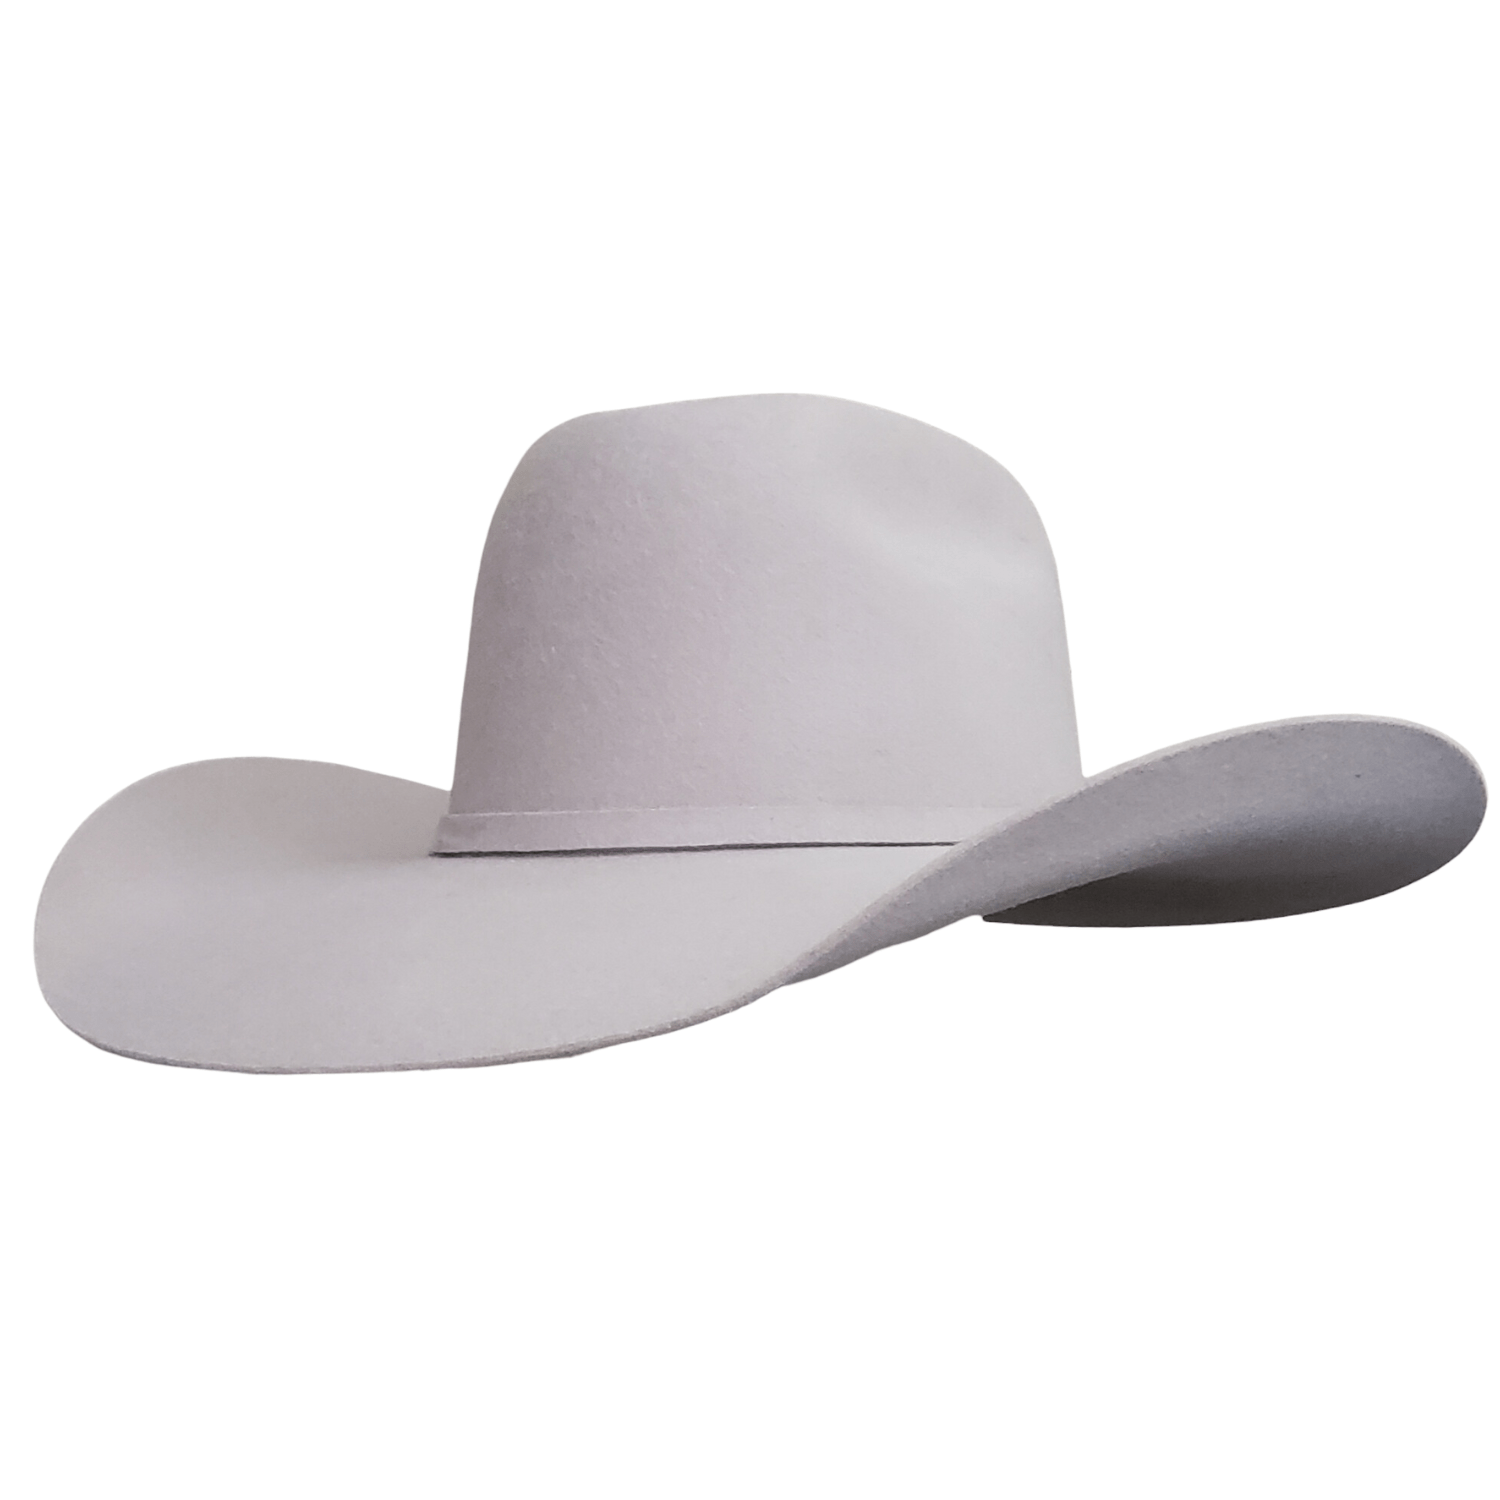 Gone Country Hats Men & Women's Hats Big Sky Silver Belly - Wool Cashmere